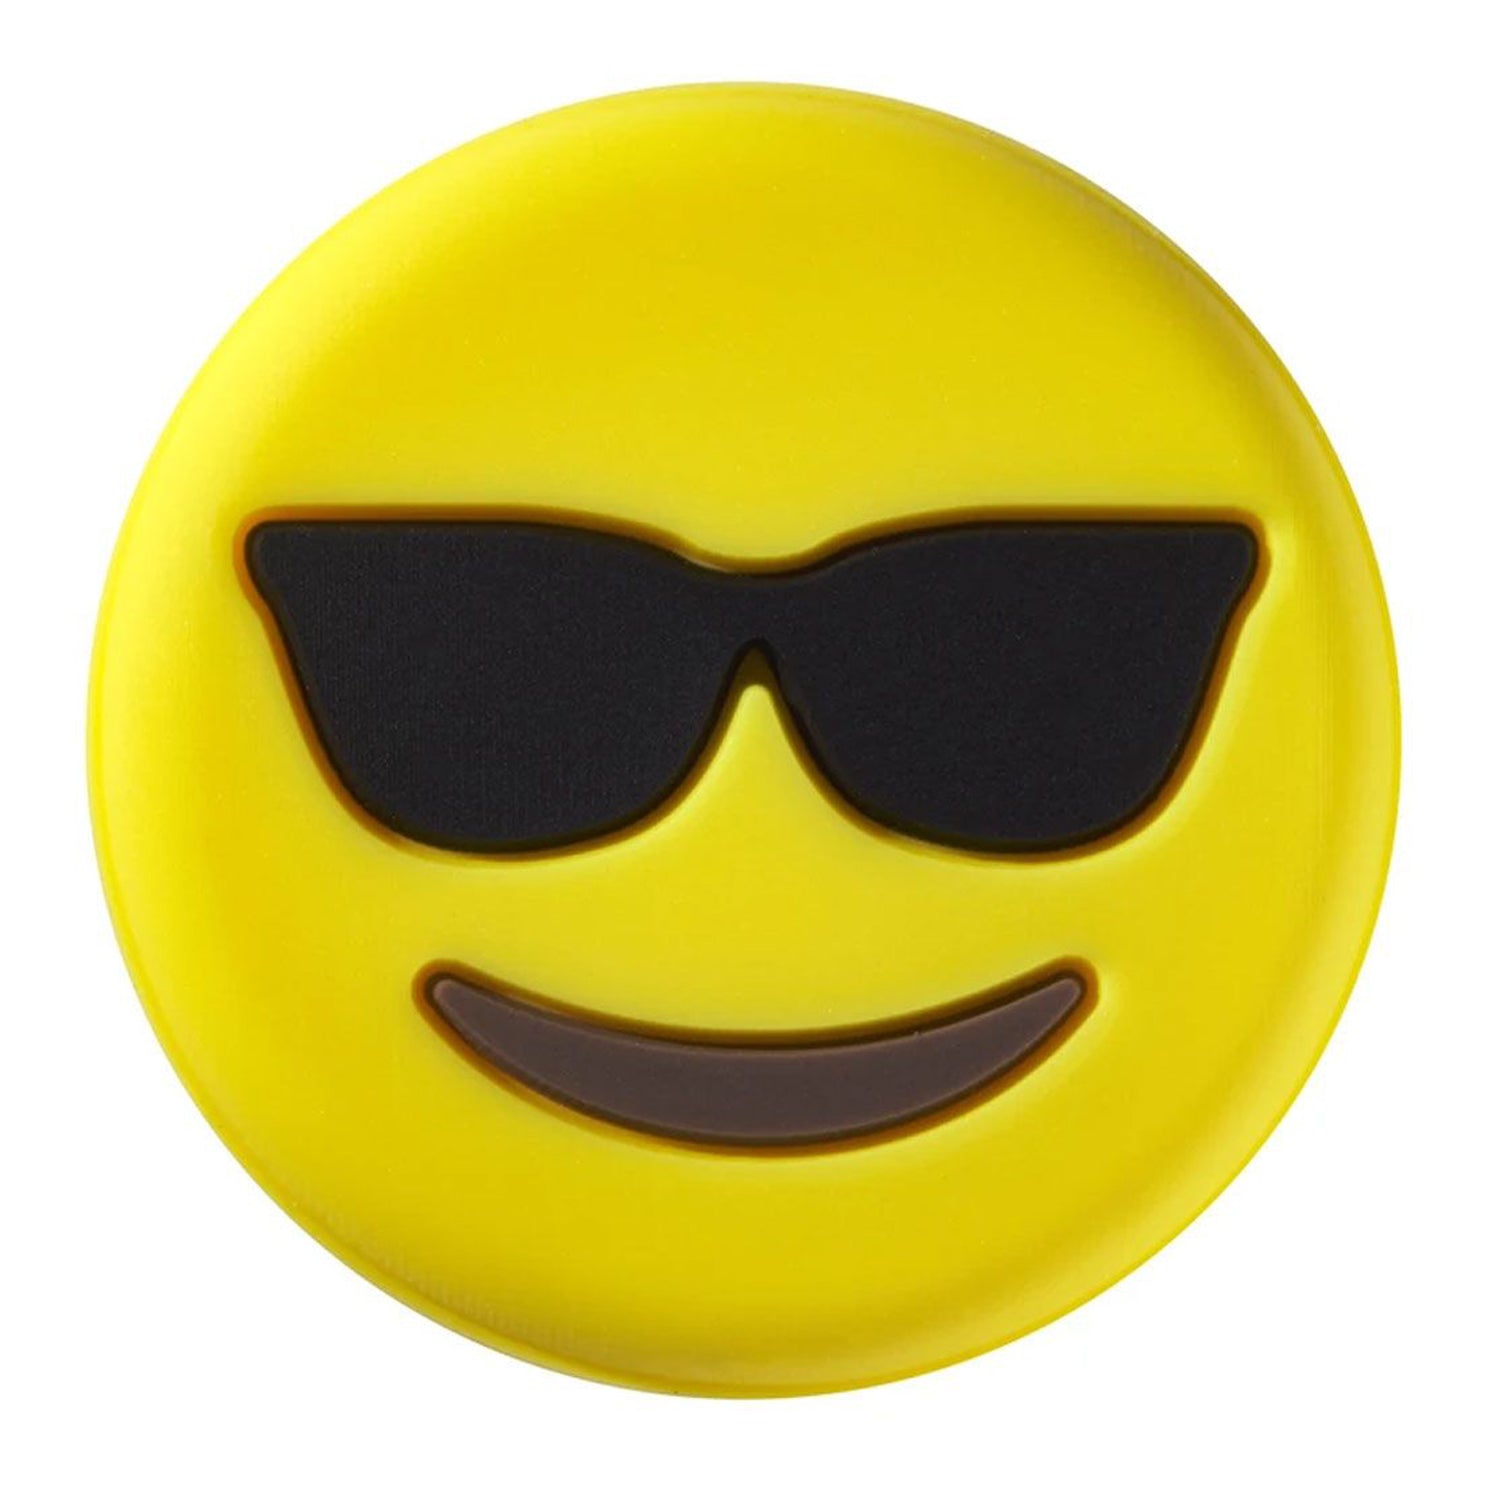 Wilson Sunglasses/Tongue Out Dampaner(pack of 2), Yellow - Best Price online Prokicksports.com